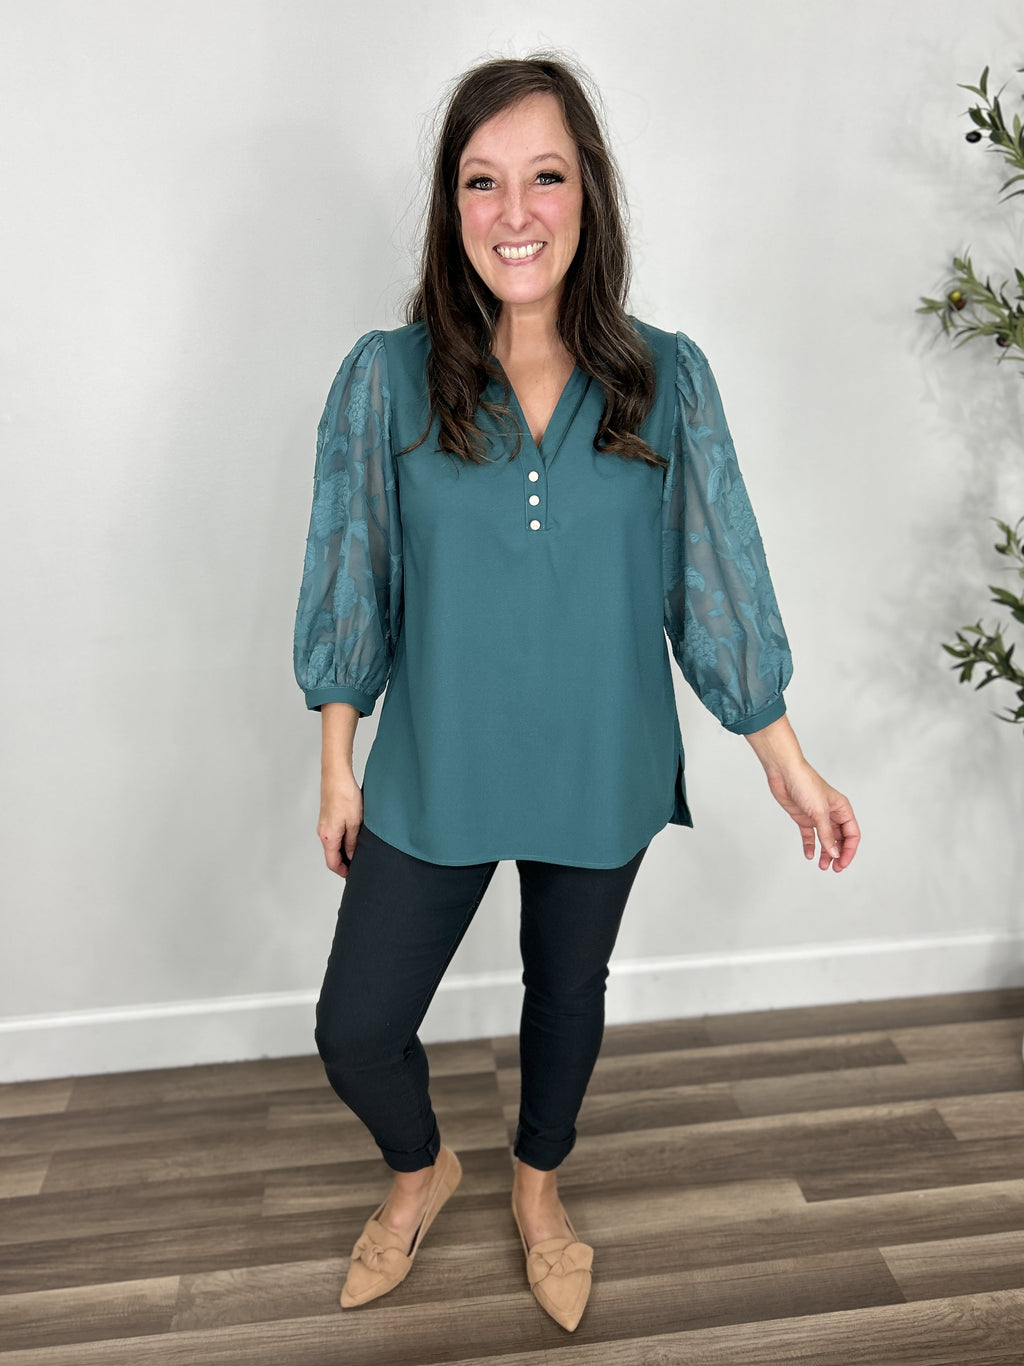 Addison Three Quarter Sheer Sleeve Top styled with charcoal skinny jeans and camel flats.